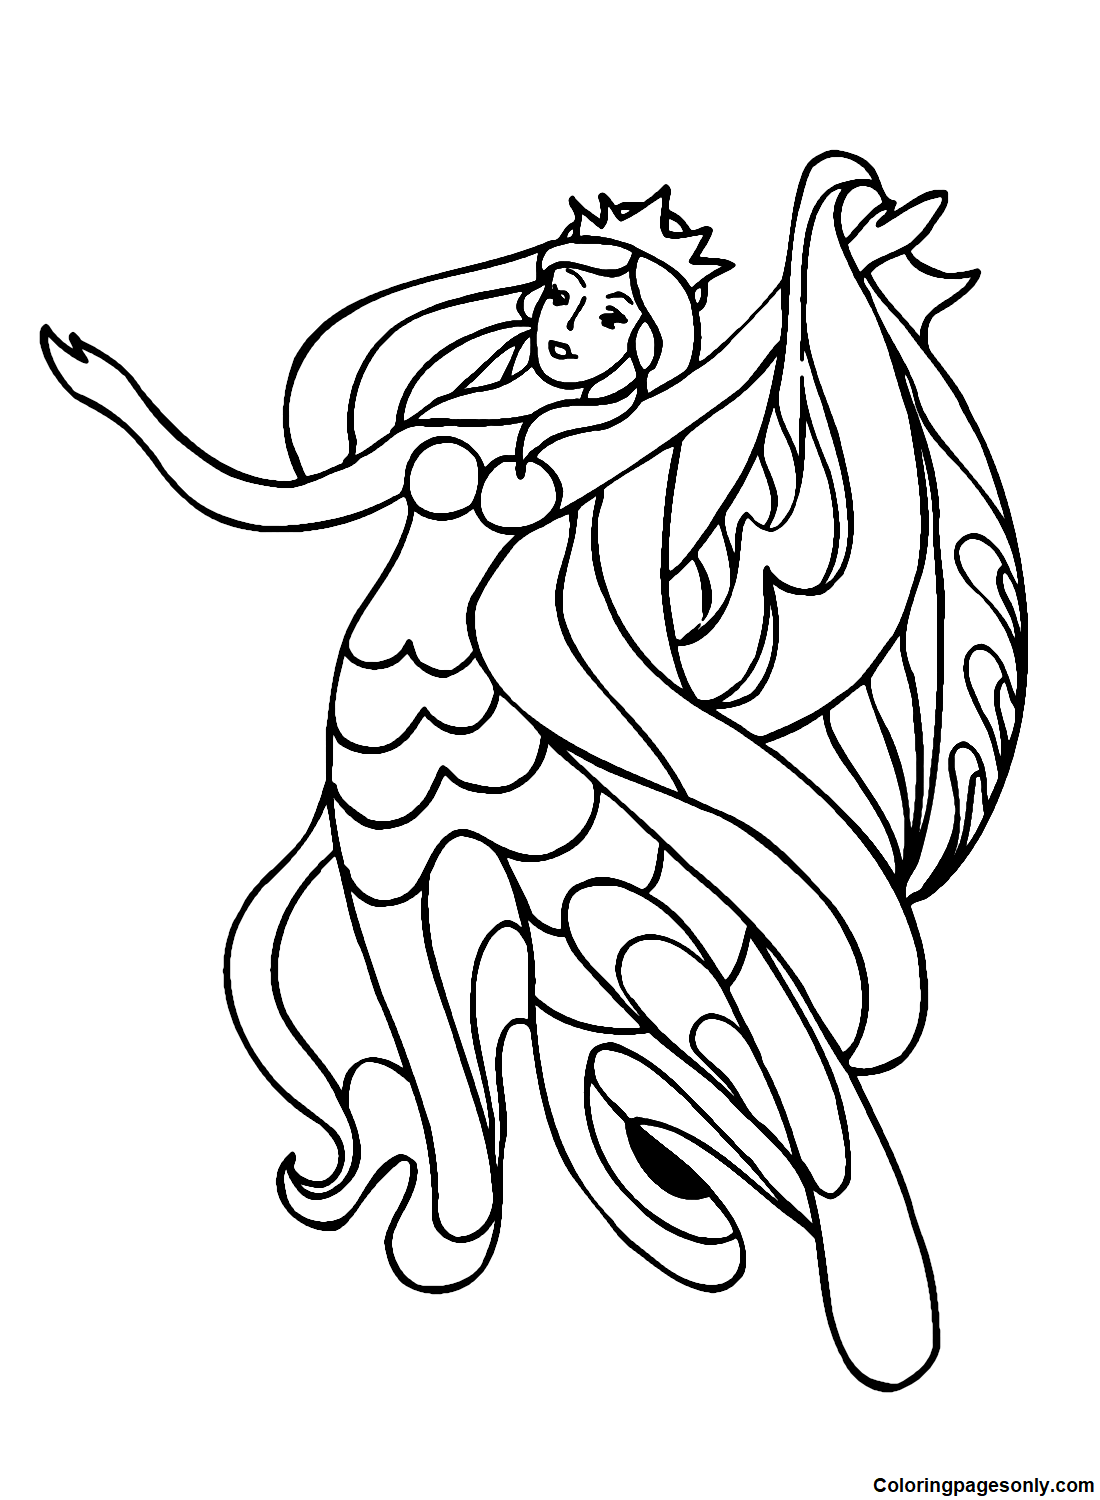 Dancing Images Coloring Pages